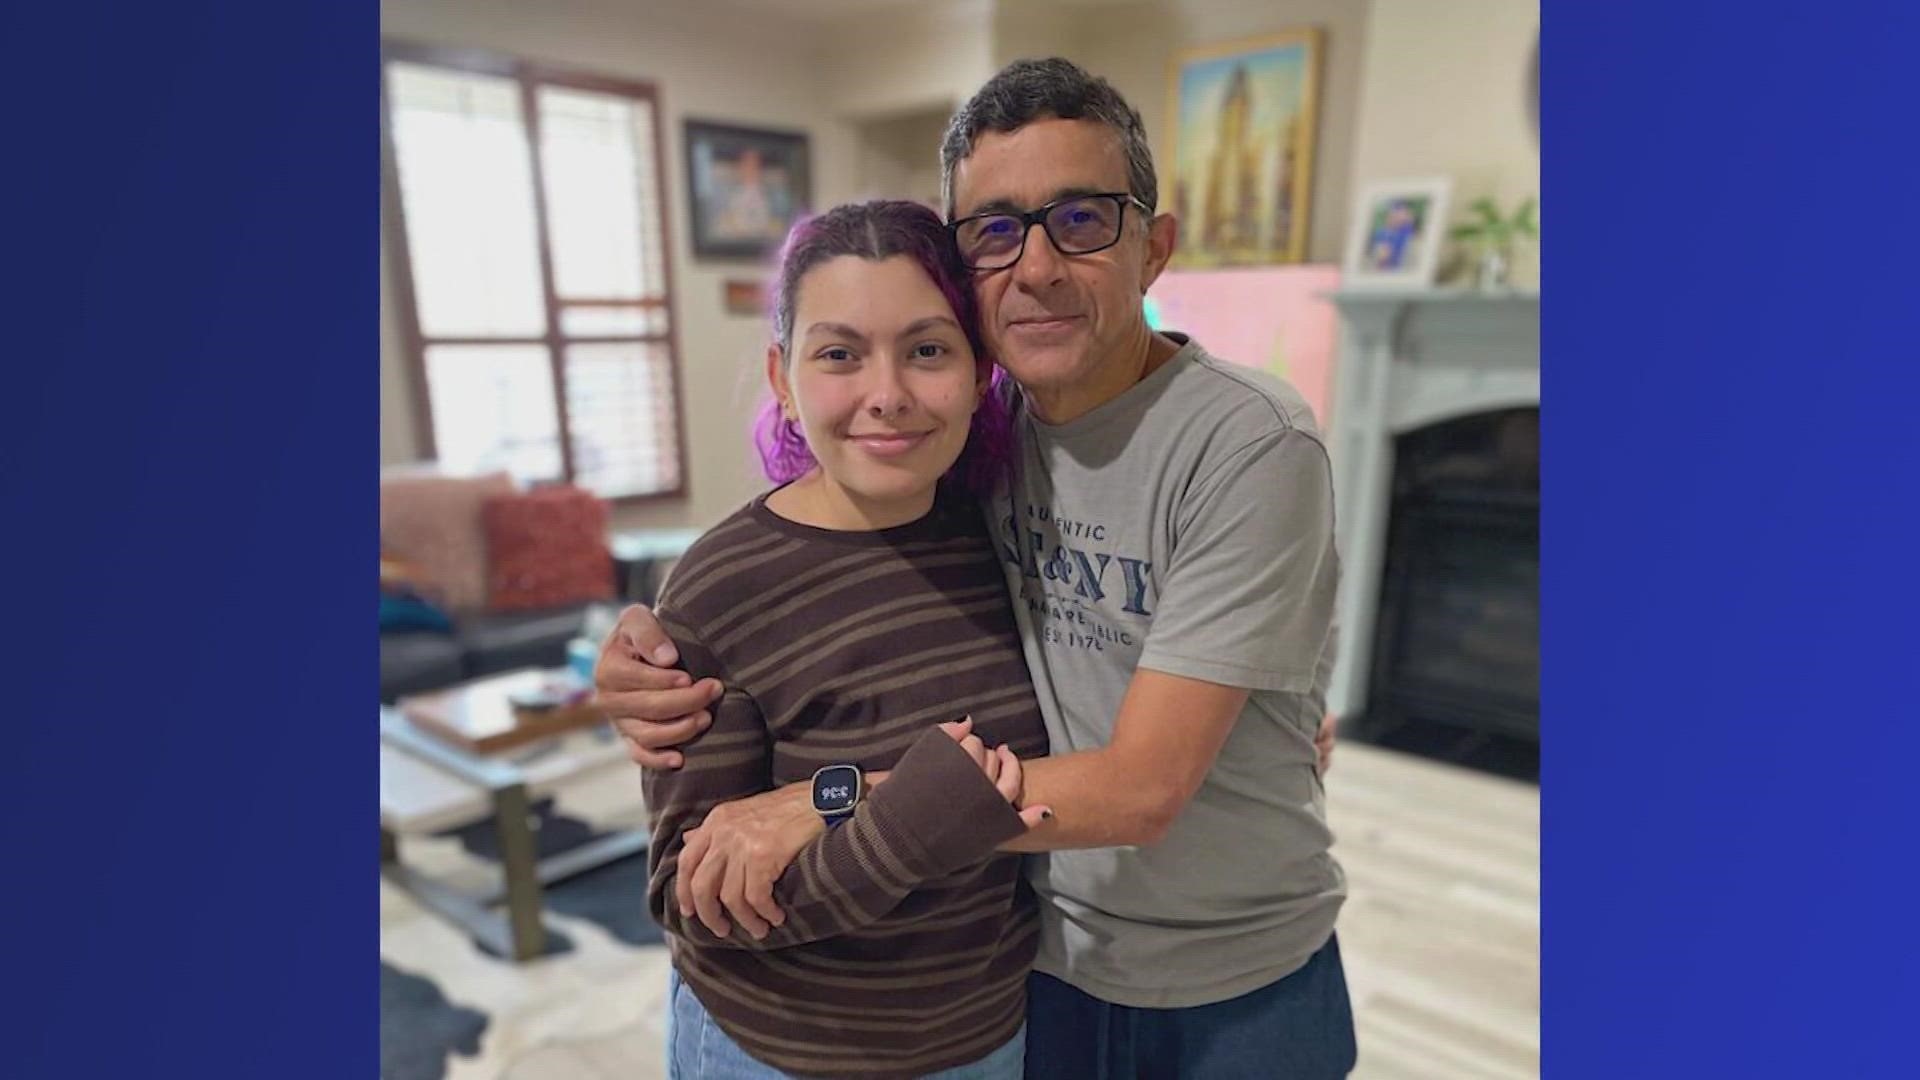 Gustavo Cardenas says he’s happy to be home after imprisonment of more than four years.